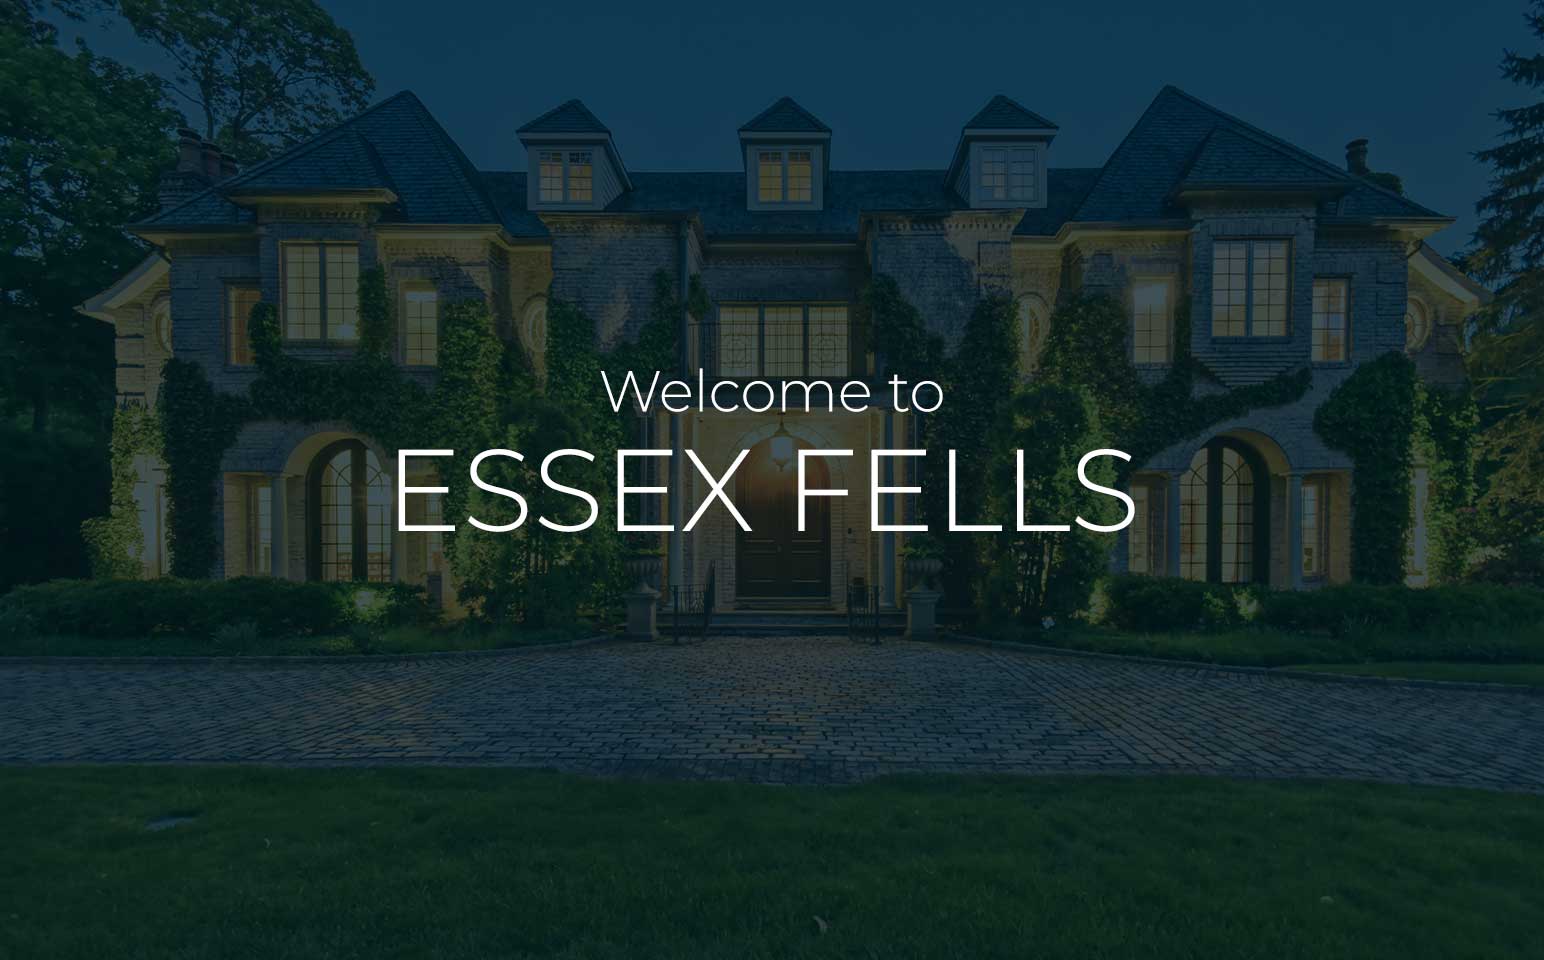 about Essex Fells